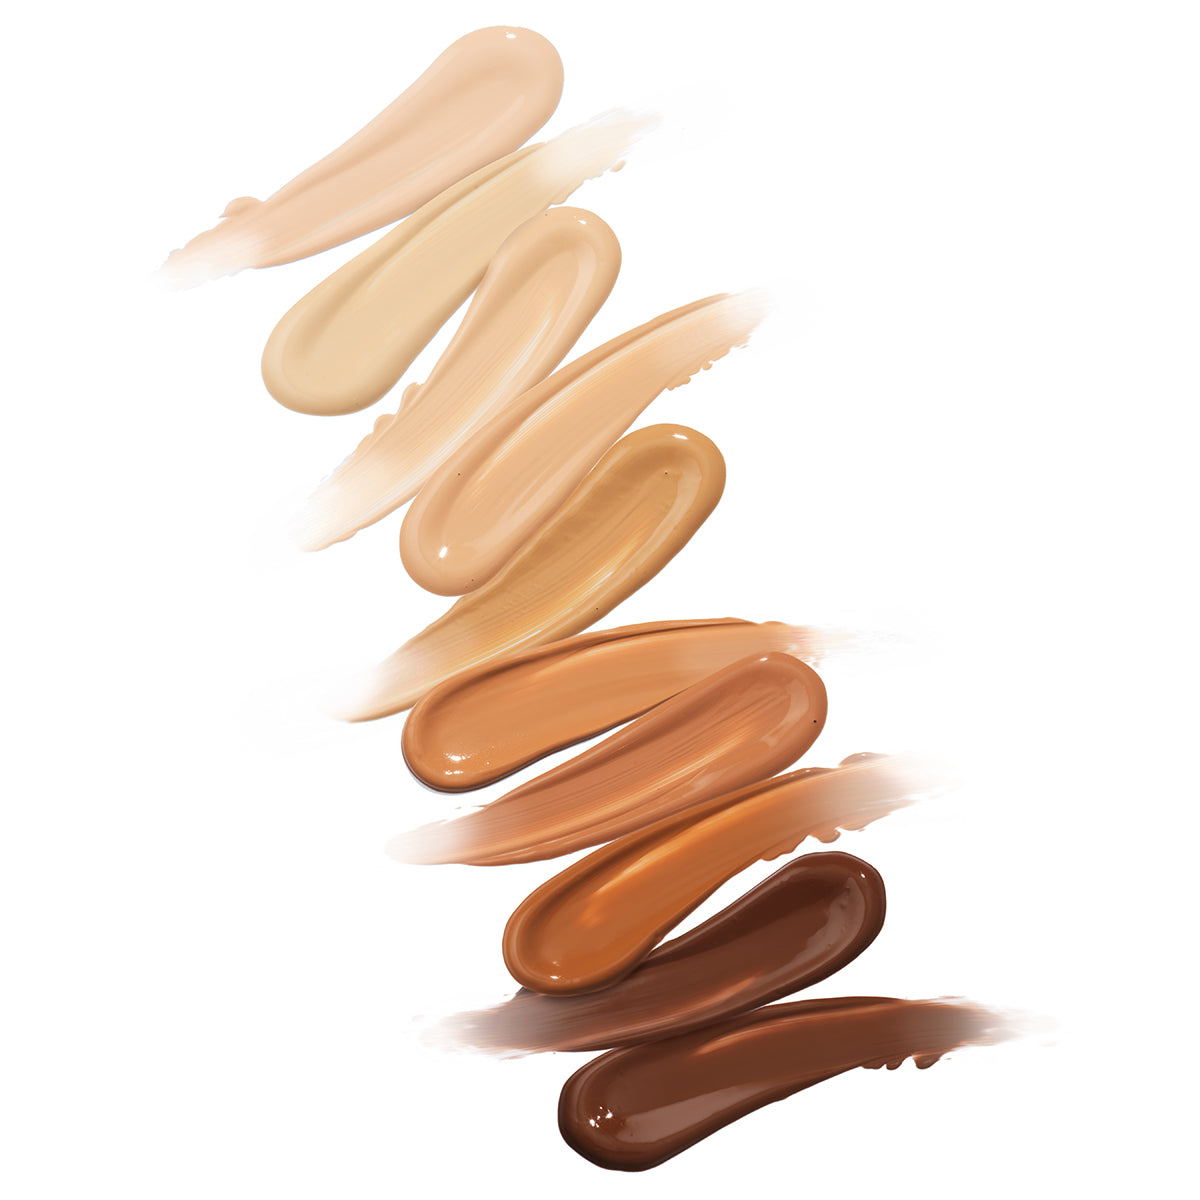 Stripped Nude Skin Tint | Kevyn Aucoin Beauty